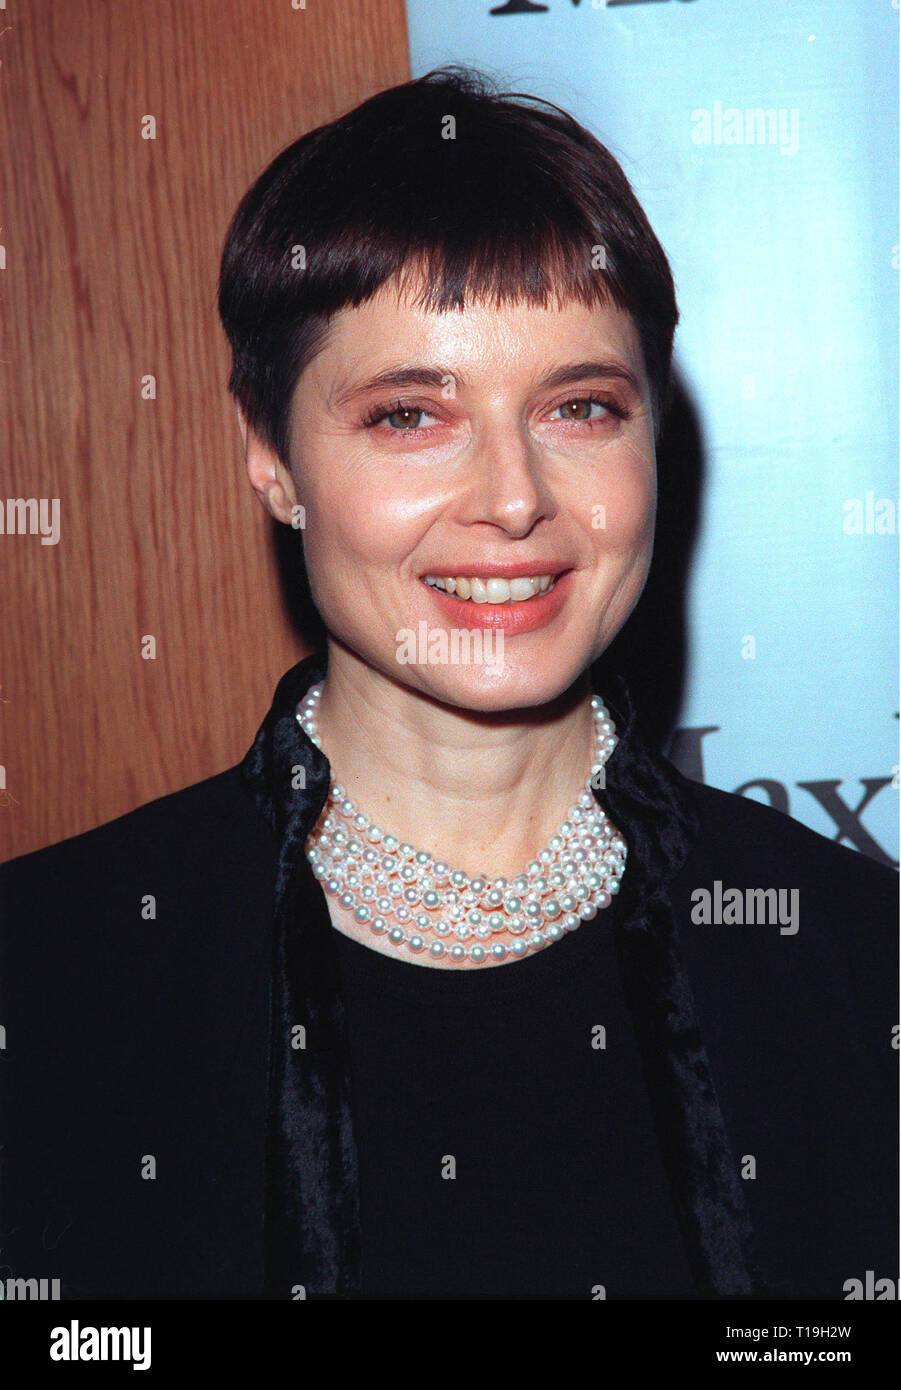 LOS ANGELES, CA - December 3, 1998: Actress ISABELLA ROSSELLINI at ...